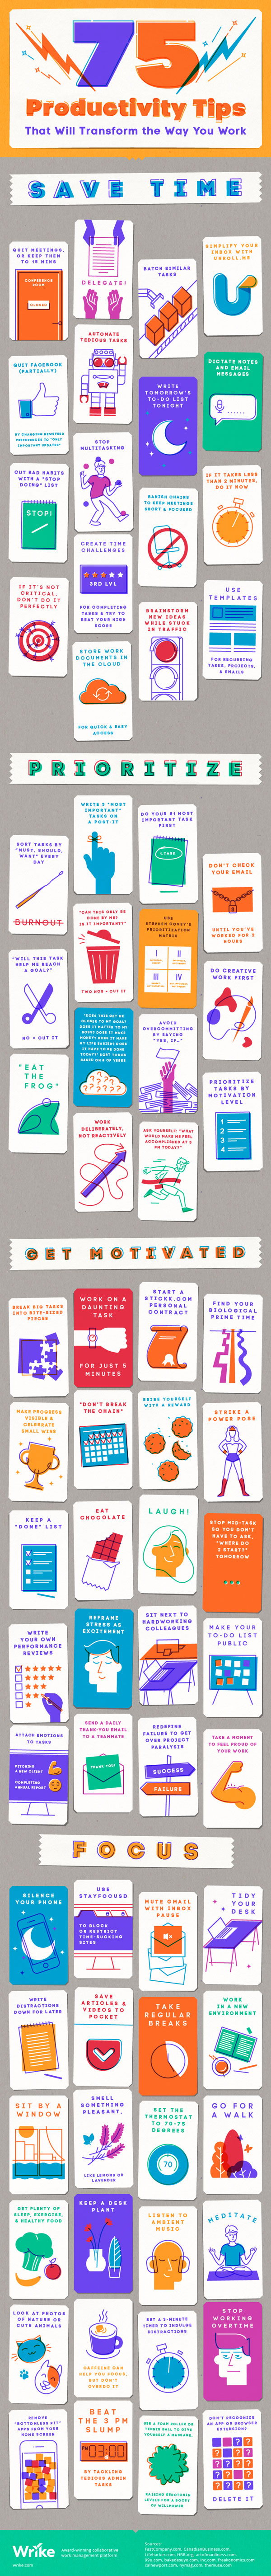 75 Productivity Tips for Work